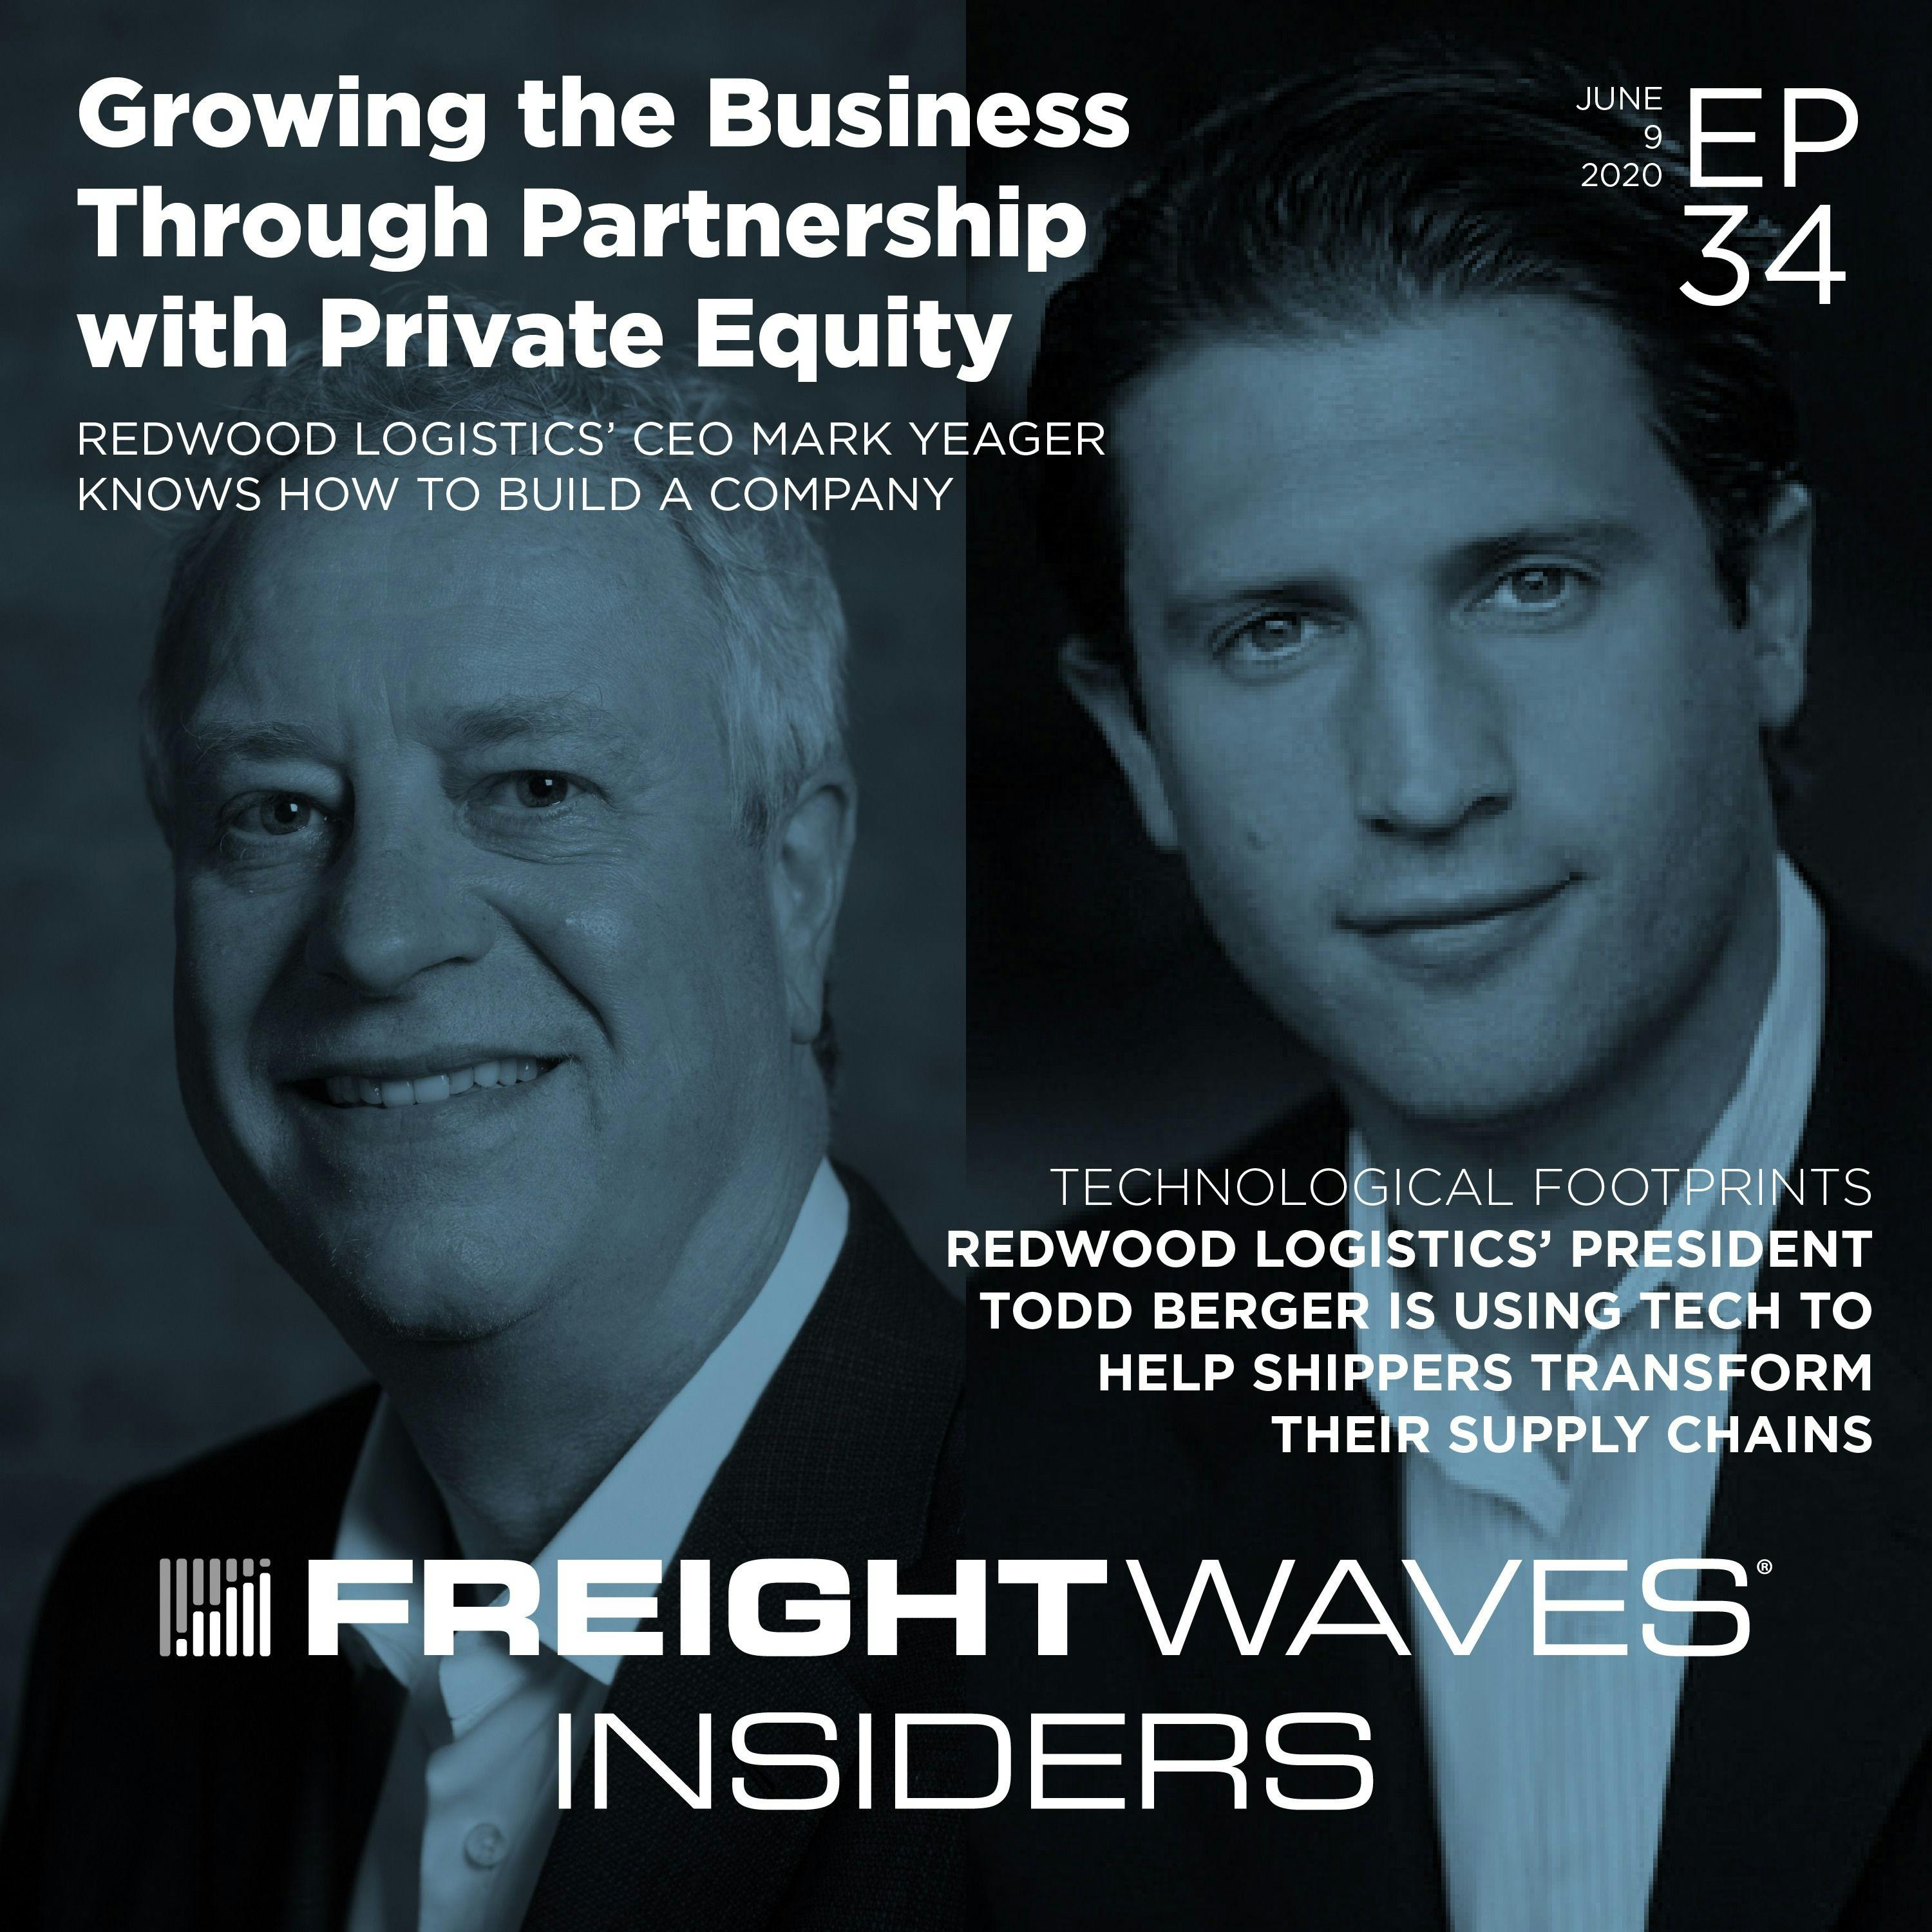 Redwood Logistics is growing the business through partnership with private equity